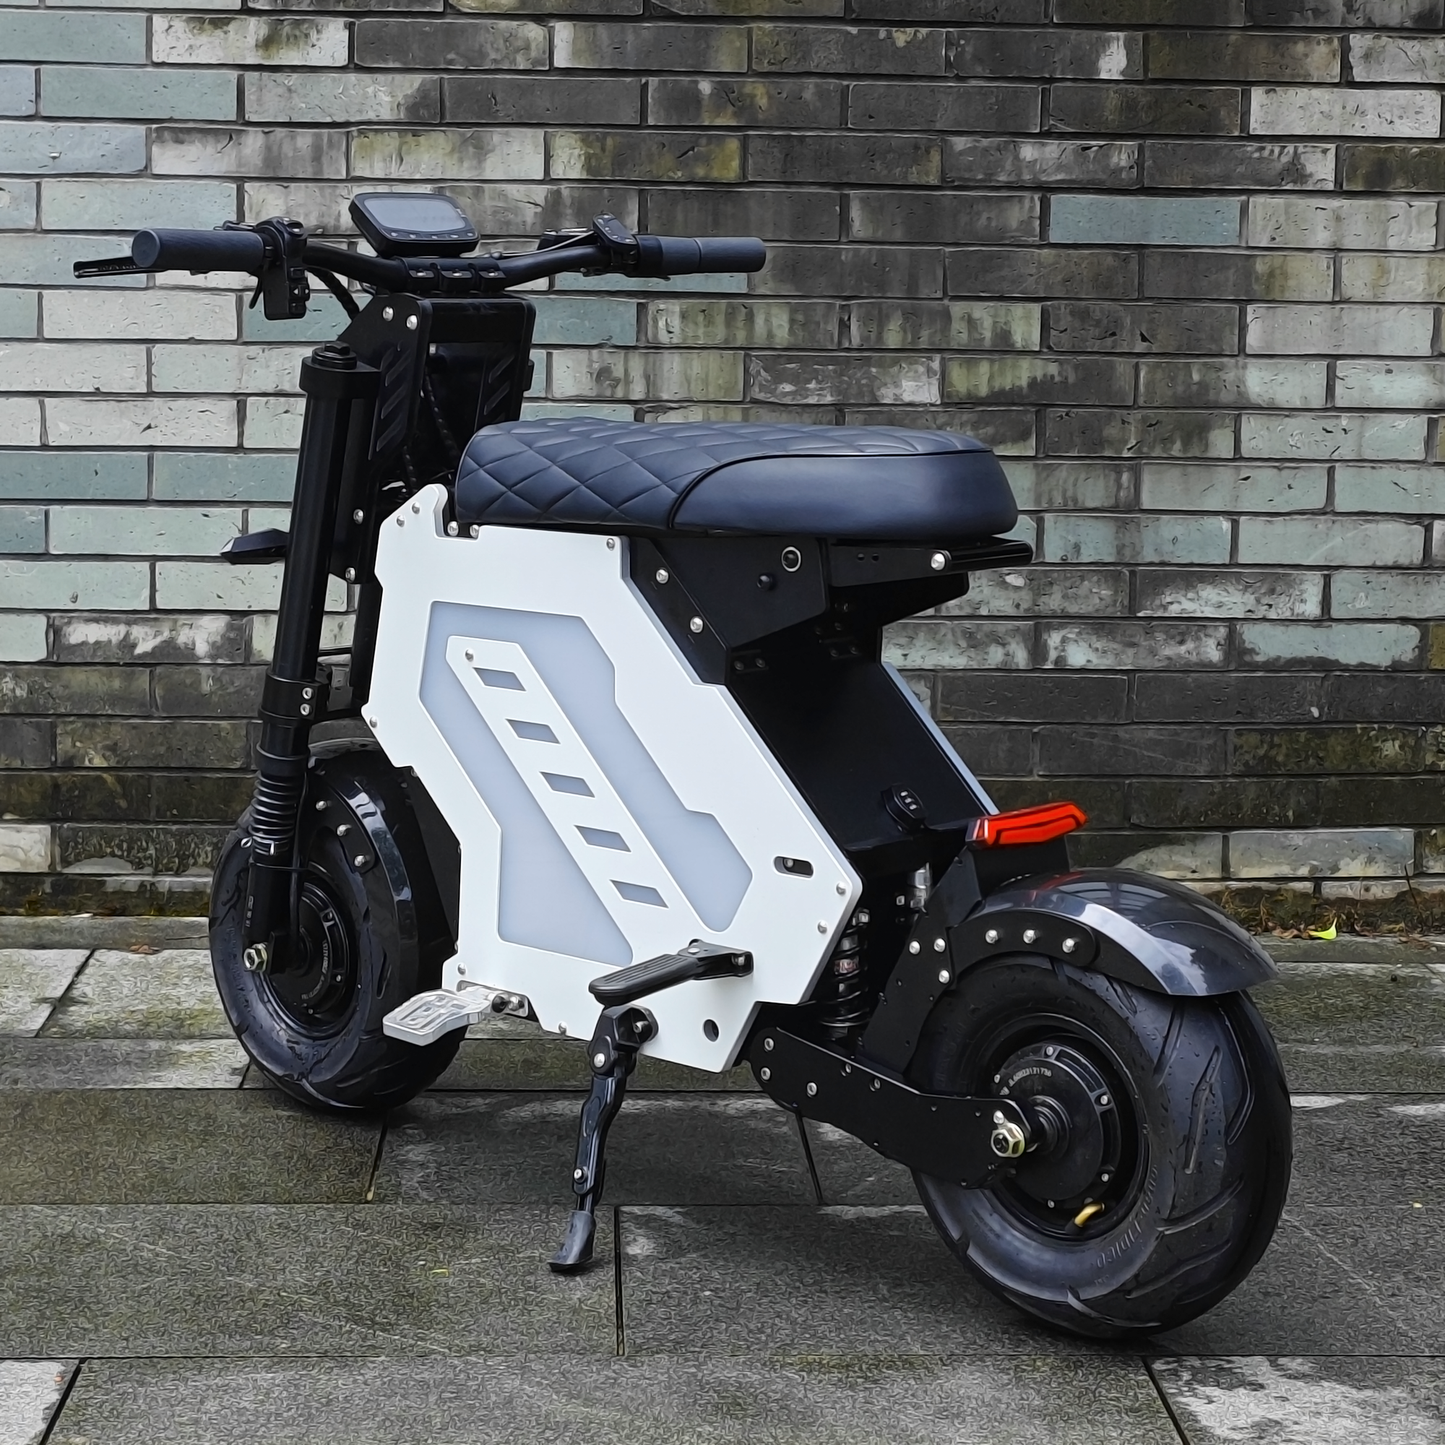 Electric motorcycle shown in an urban environment, black and white design, suitable for city commuting